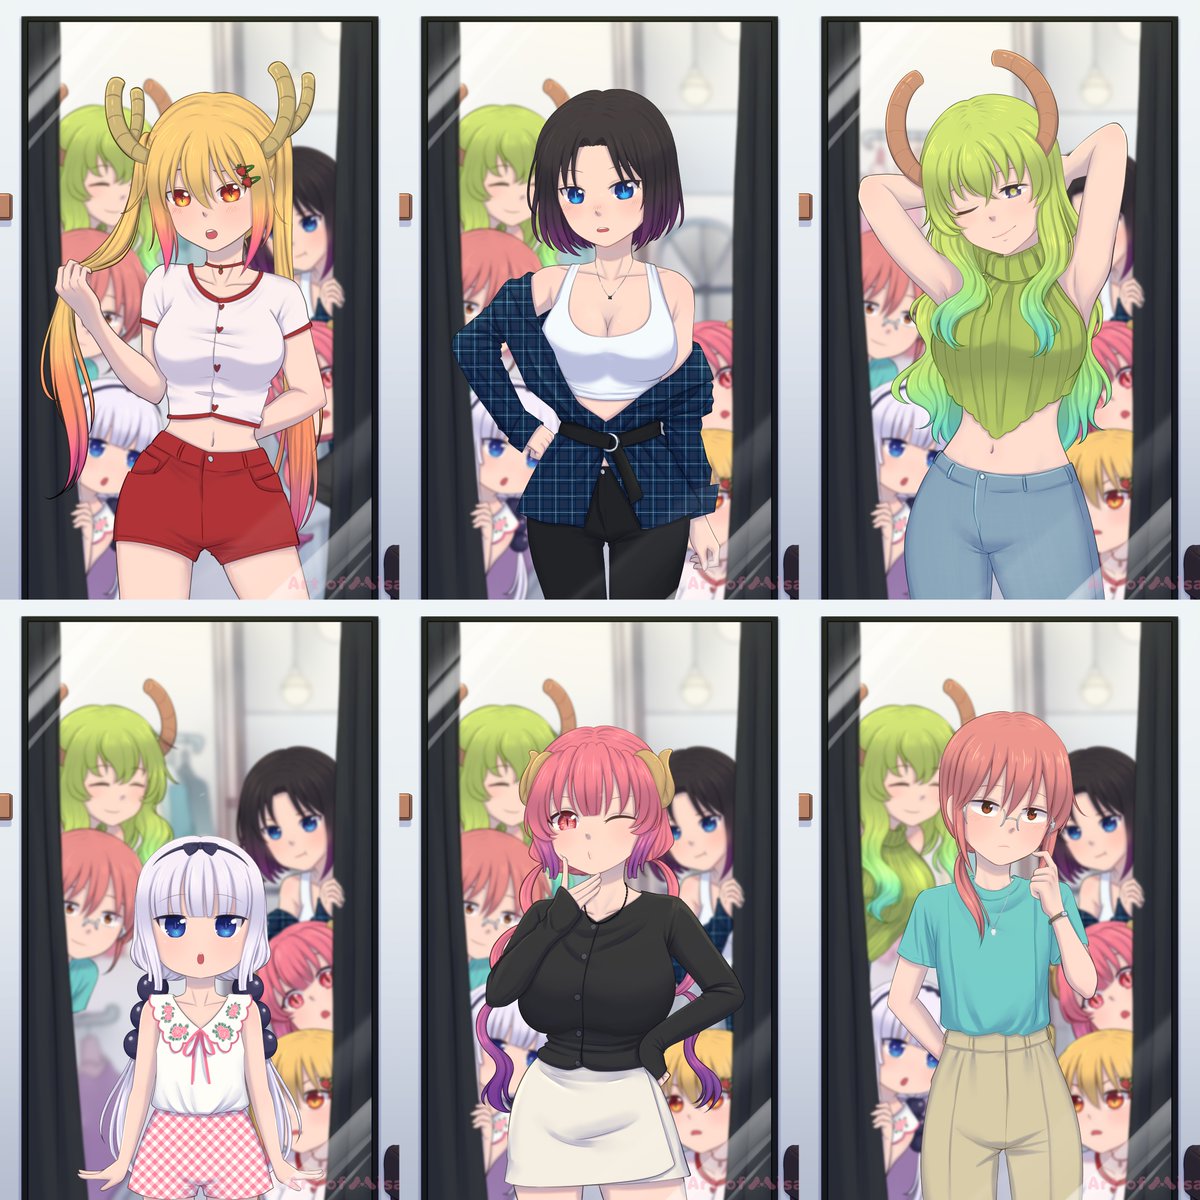 Just a collection of my MKDM fits!
Whose clothes would you rather wear??? 👀💖
#maiddragon #misskobayashisdragonmaid